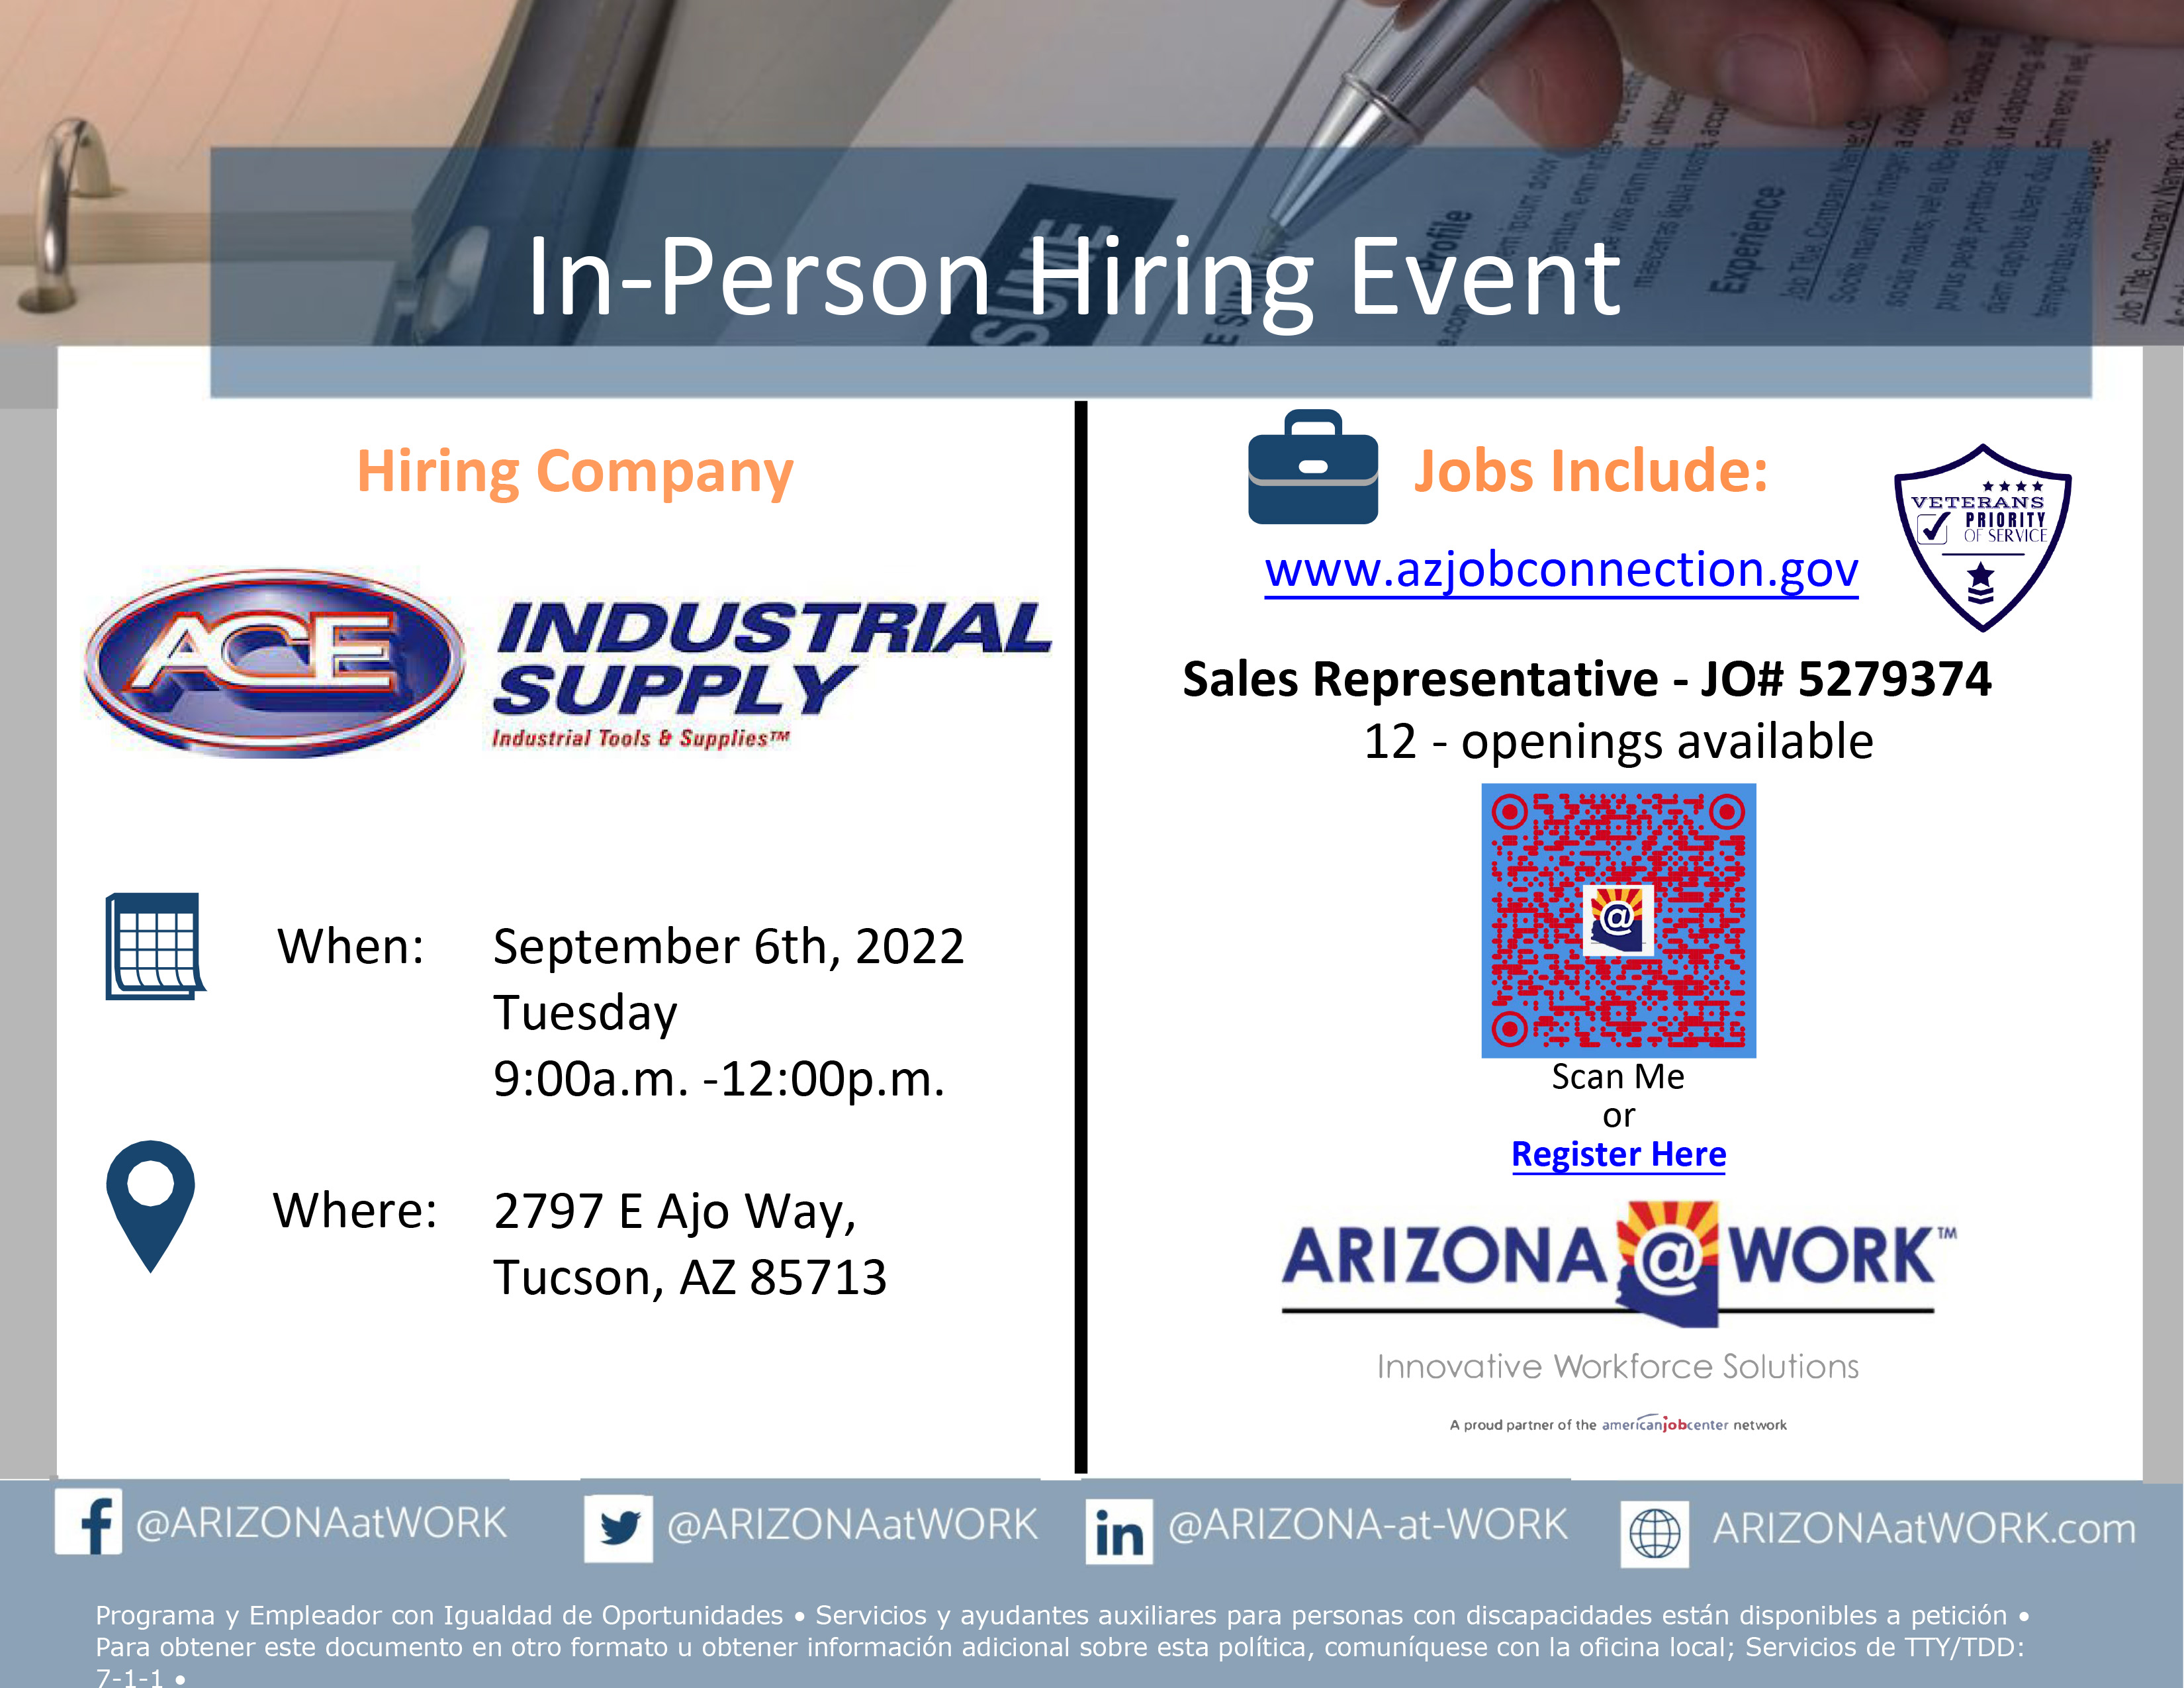 Ace Industrial Supply Hiring Event in Tucson on 9-6